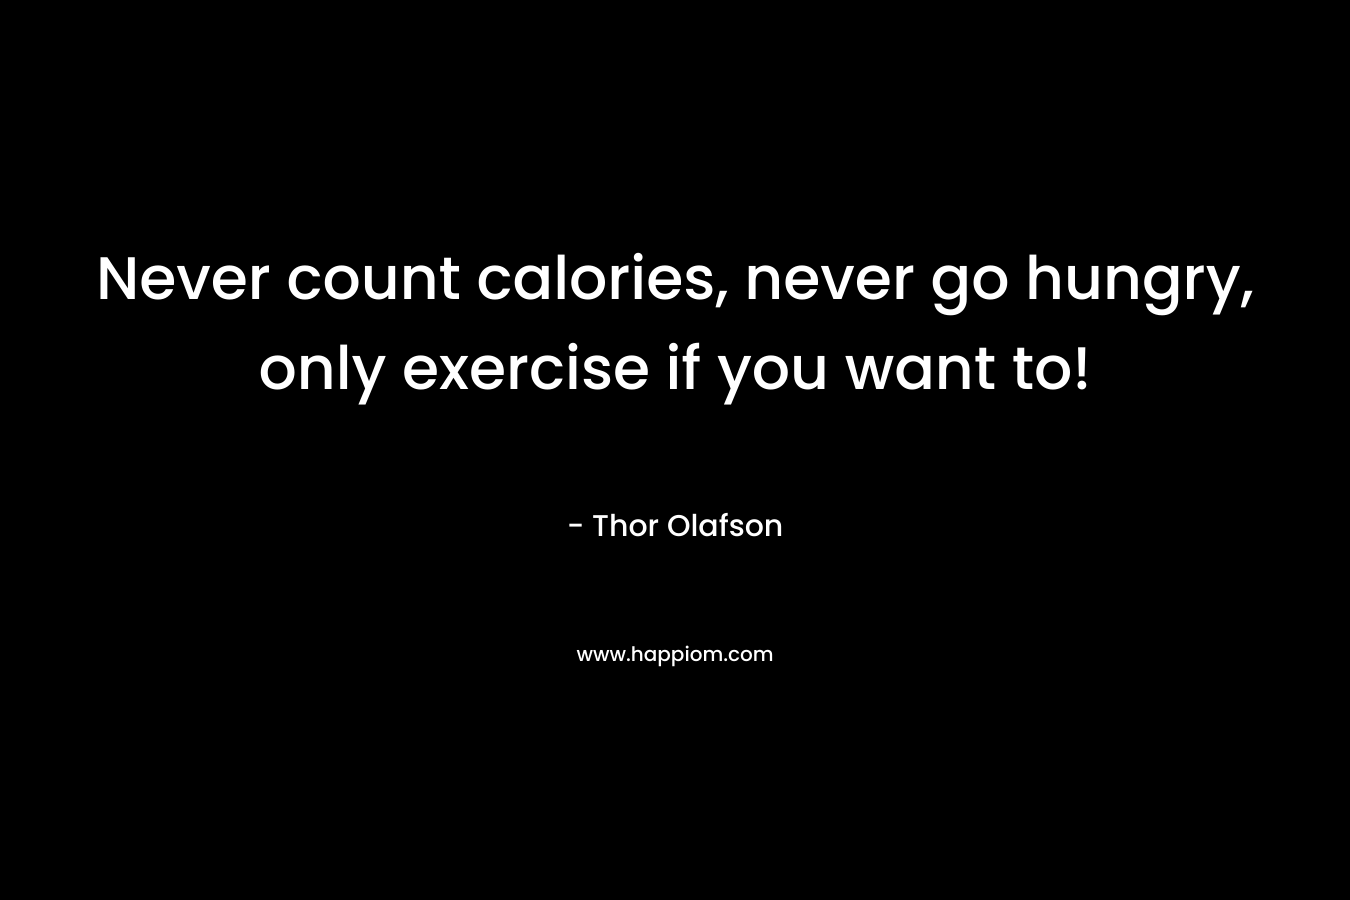 Never count calories, never go hungry, only exercise if you want to!